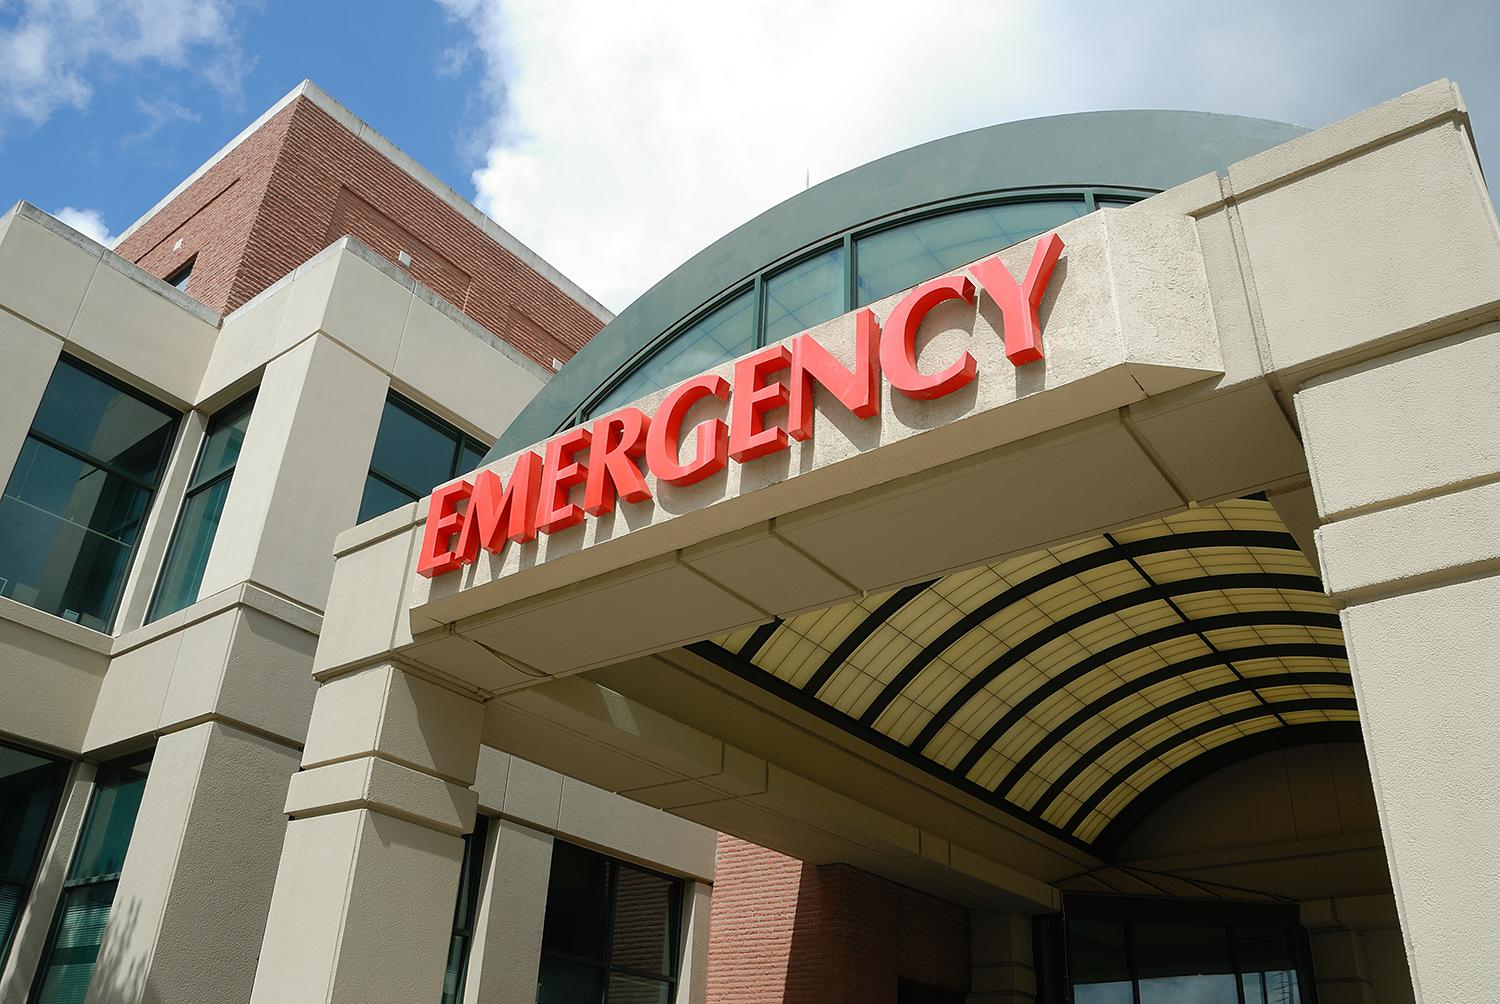 Entrance to an Emergency department